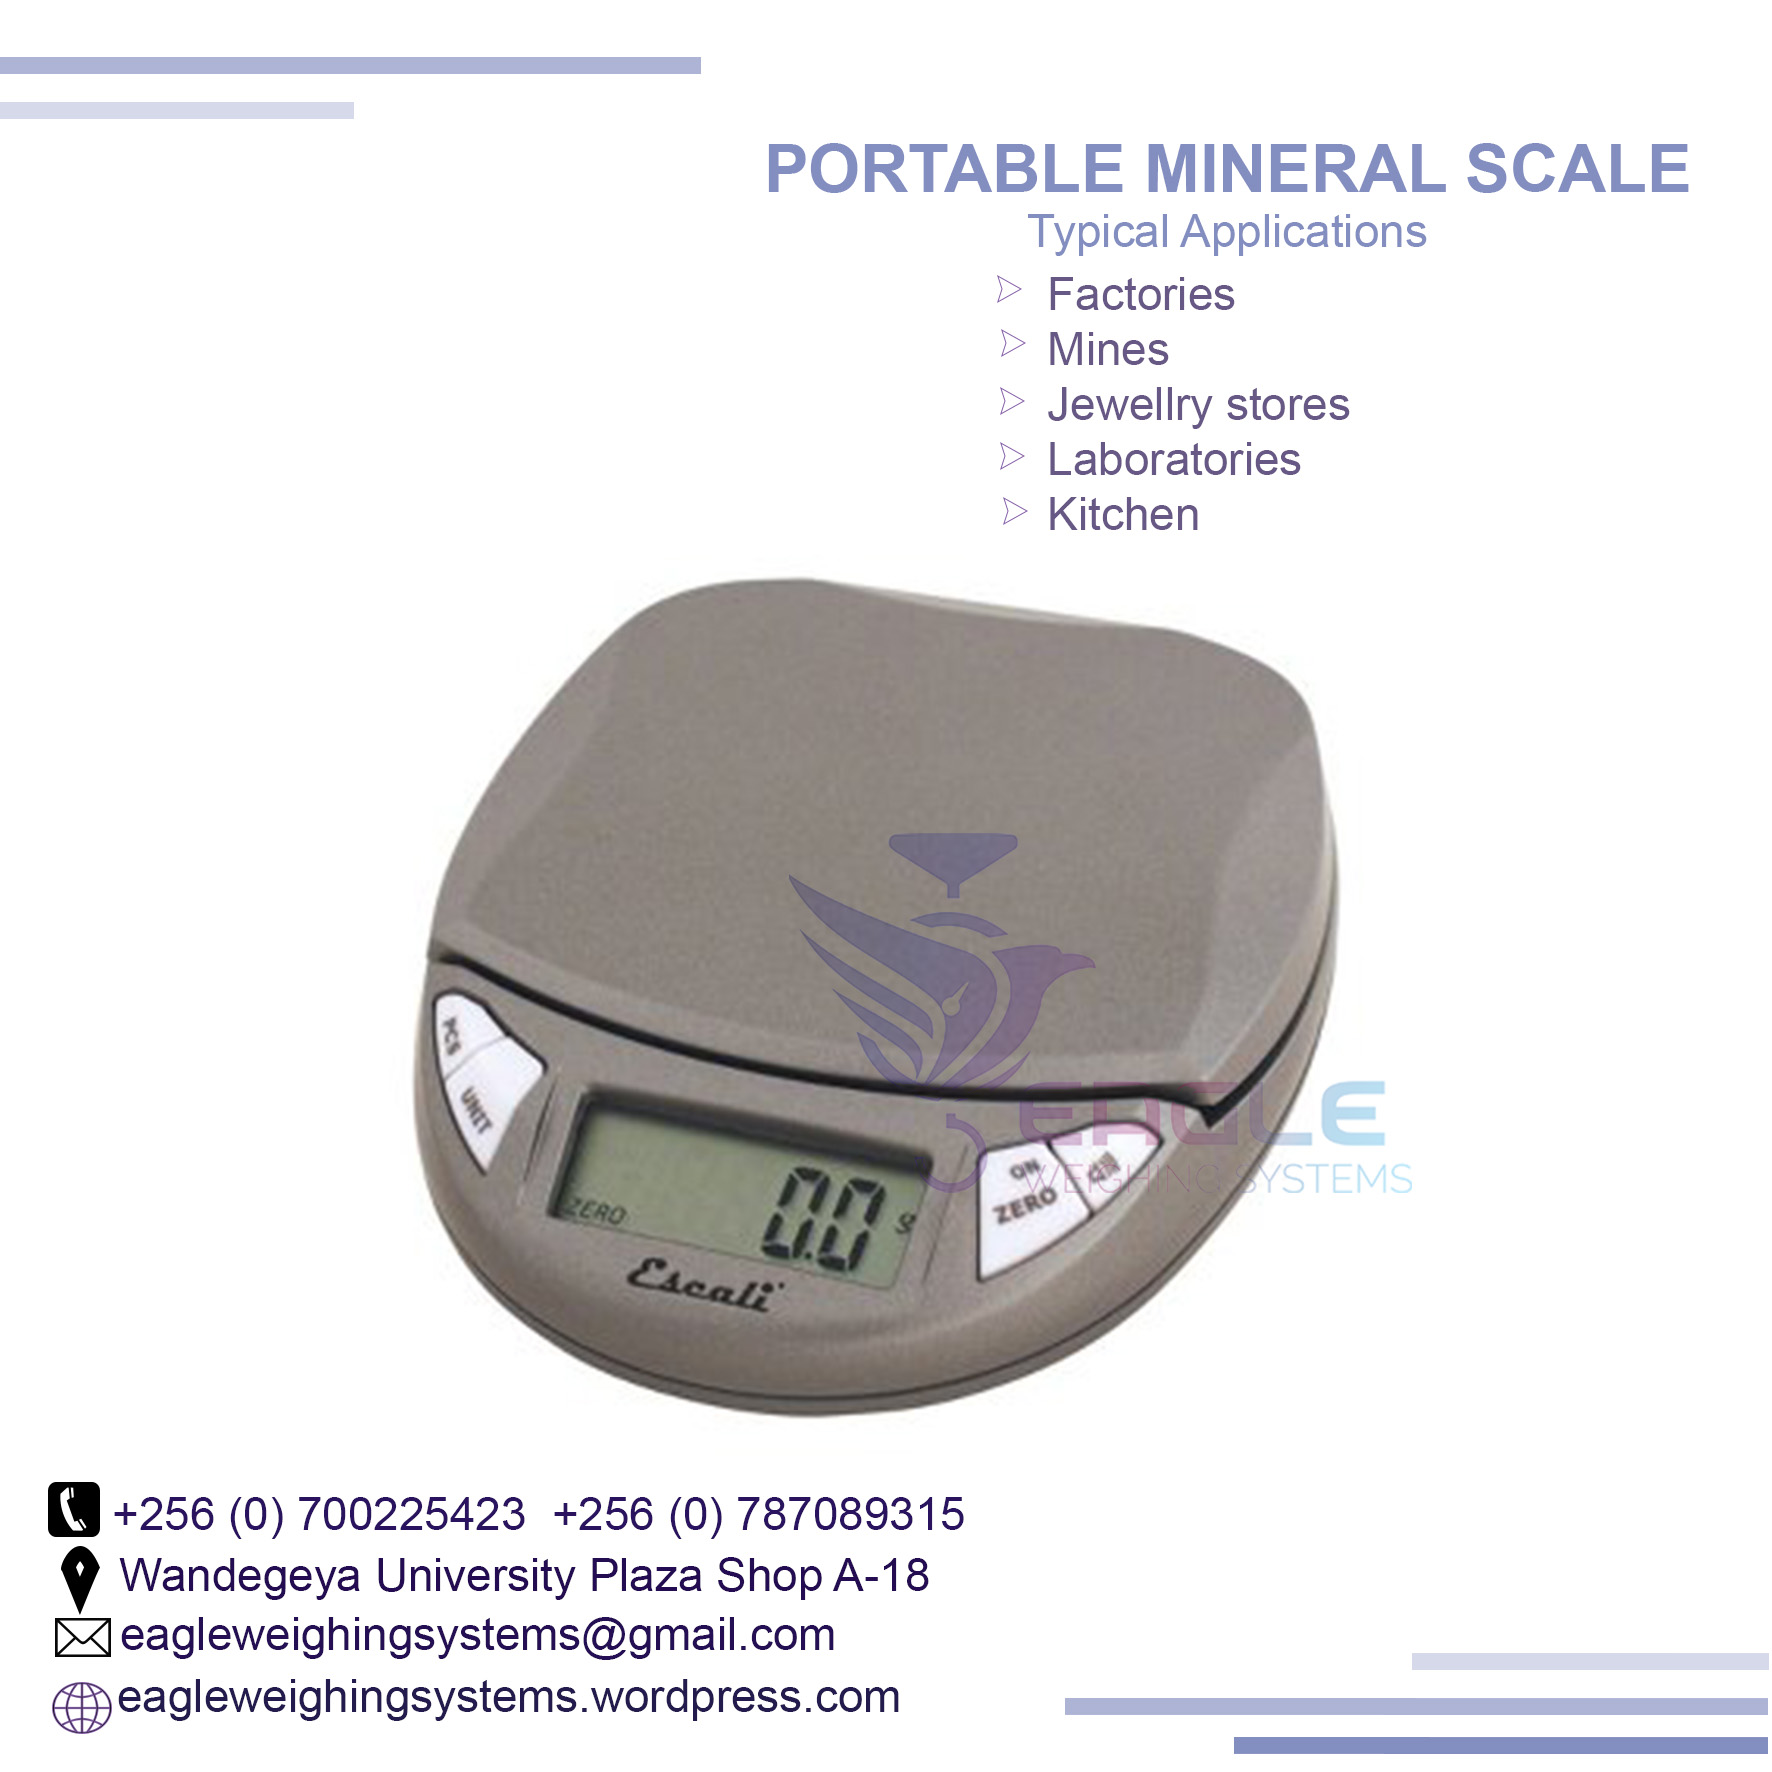 Table top digital Portable mineral, jewelry weighing scales for sale in Kampala Uganda, Kampala Central Division, Central, Uganda